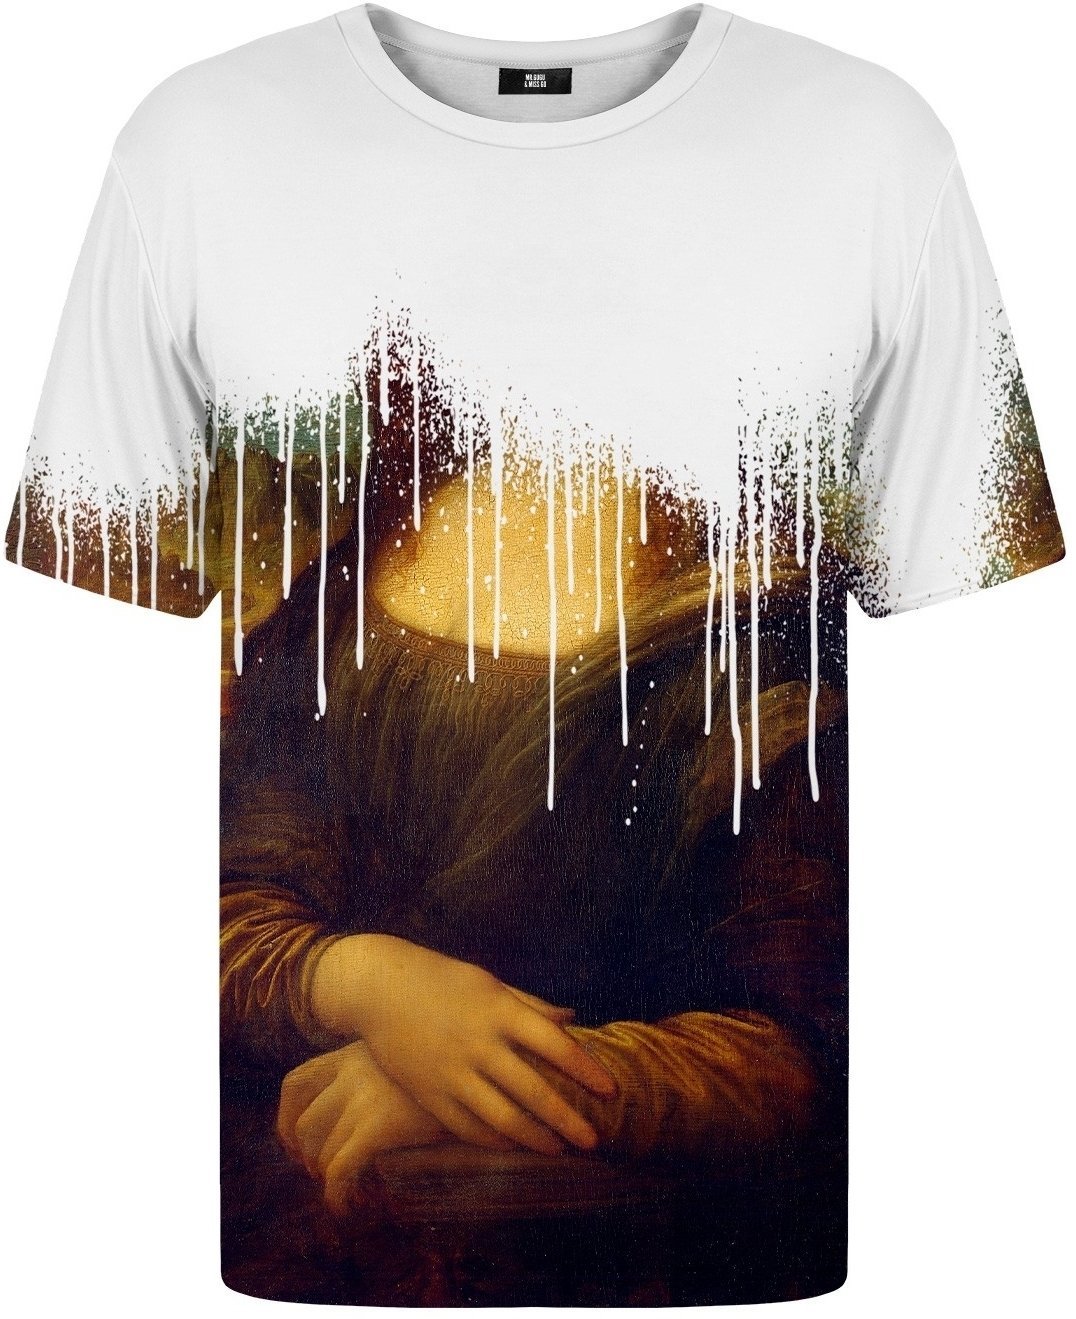 T-Shirt Mr. Gugu and Miss Go T-Shirt Mona Lisa Is Dead S